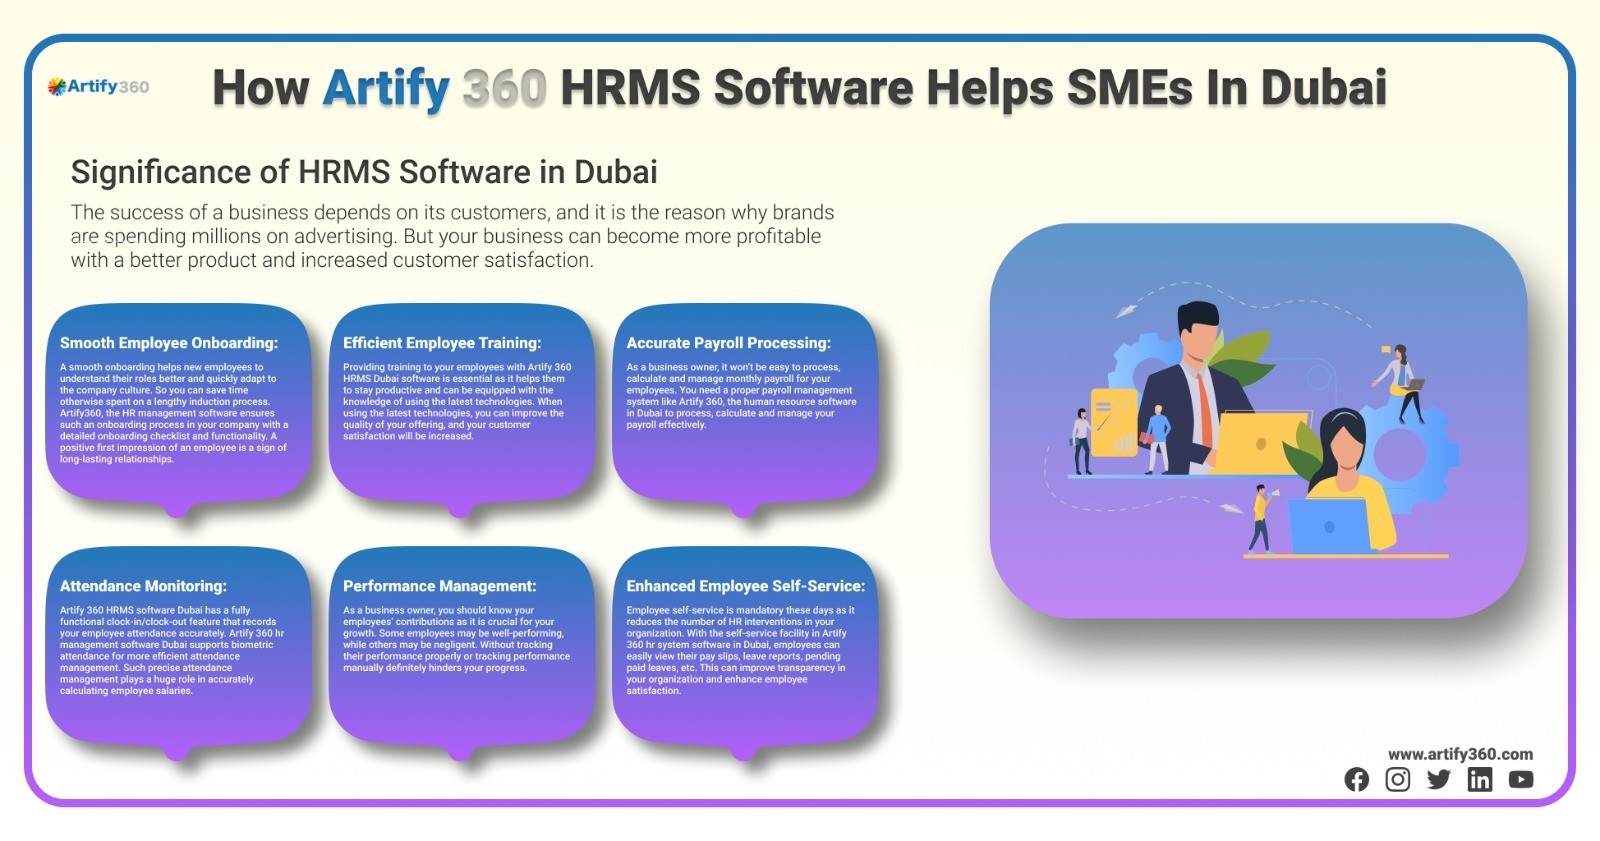 ''Dubai HR Software: Artify 360 HRMS Software for Hassle-Free HR Management''